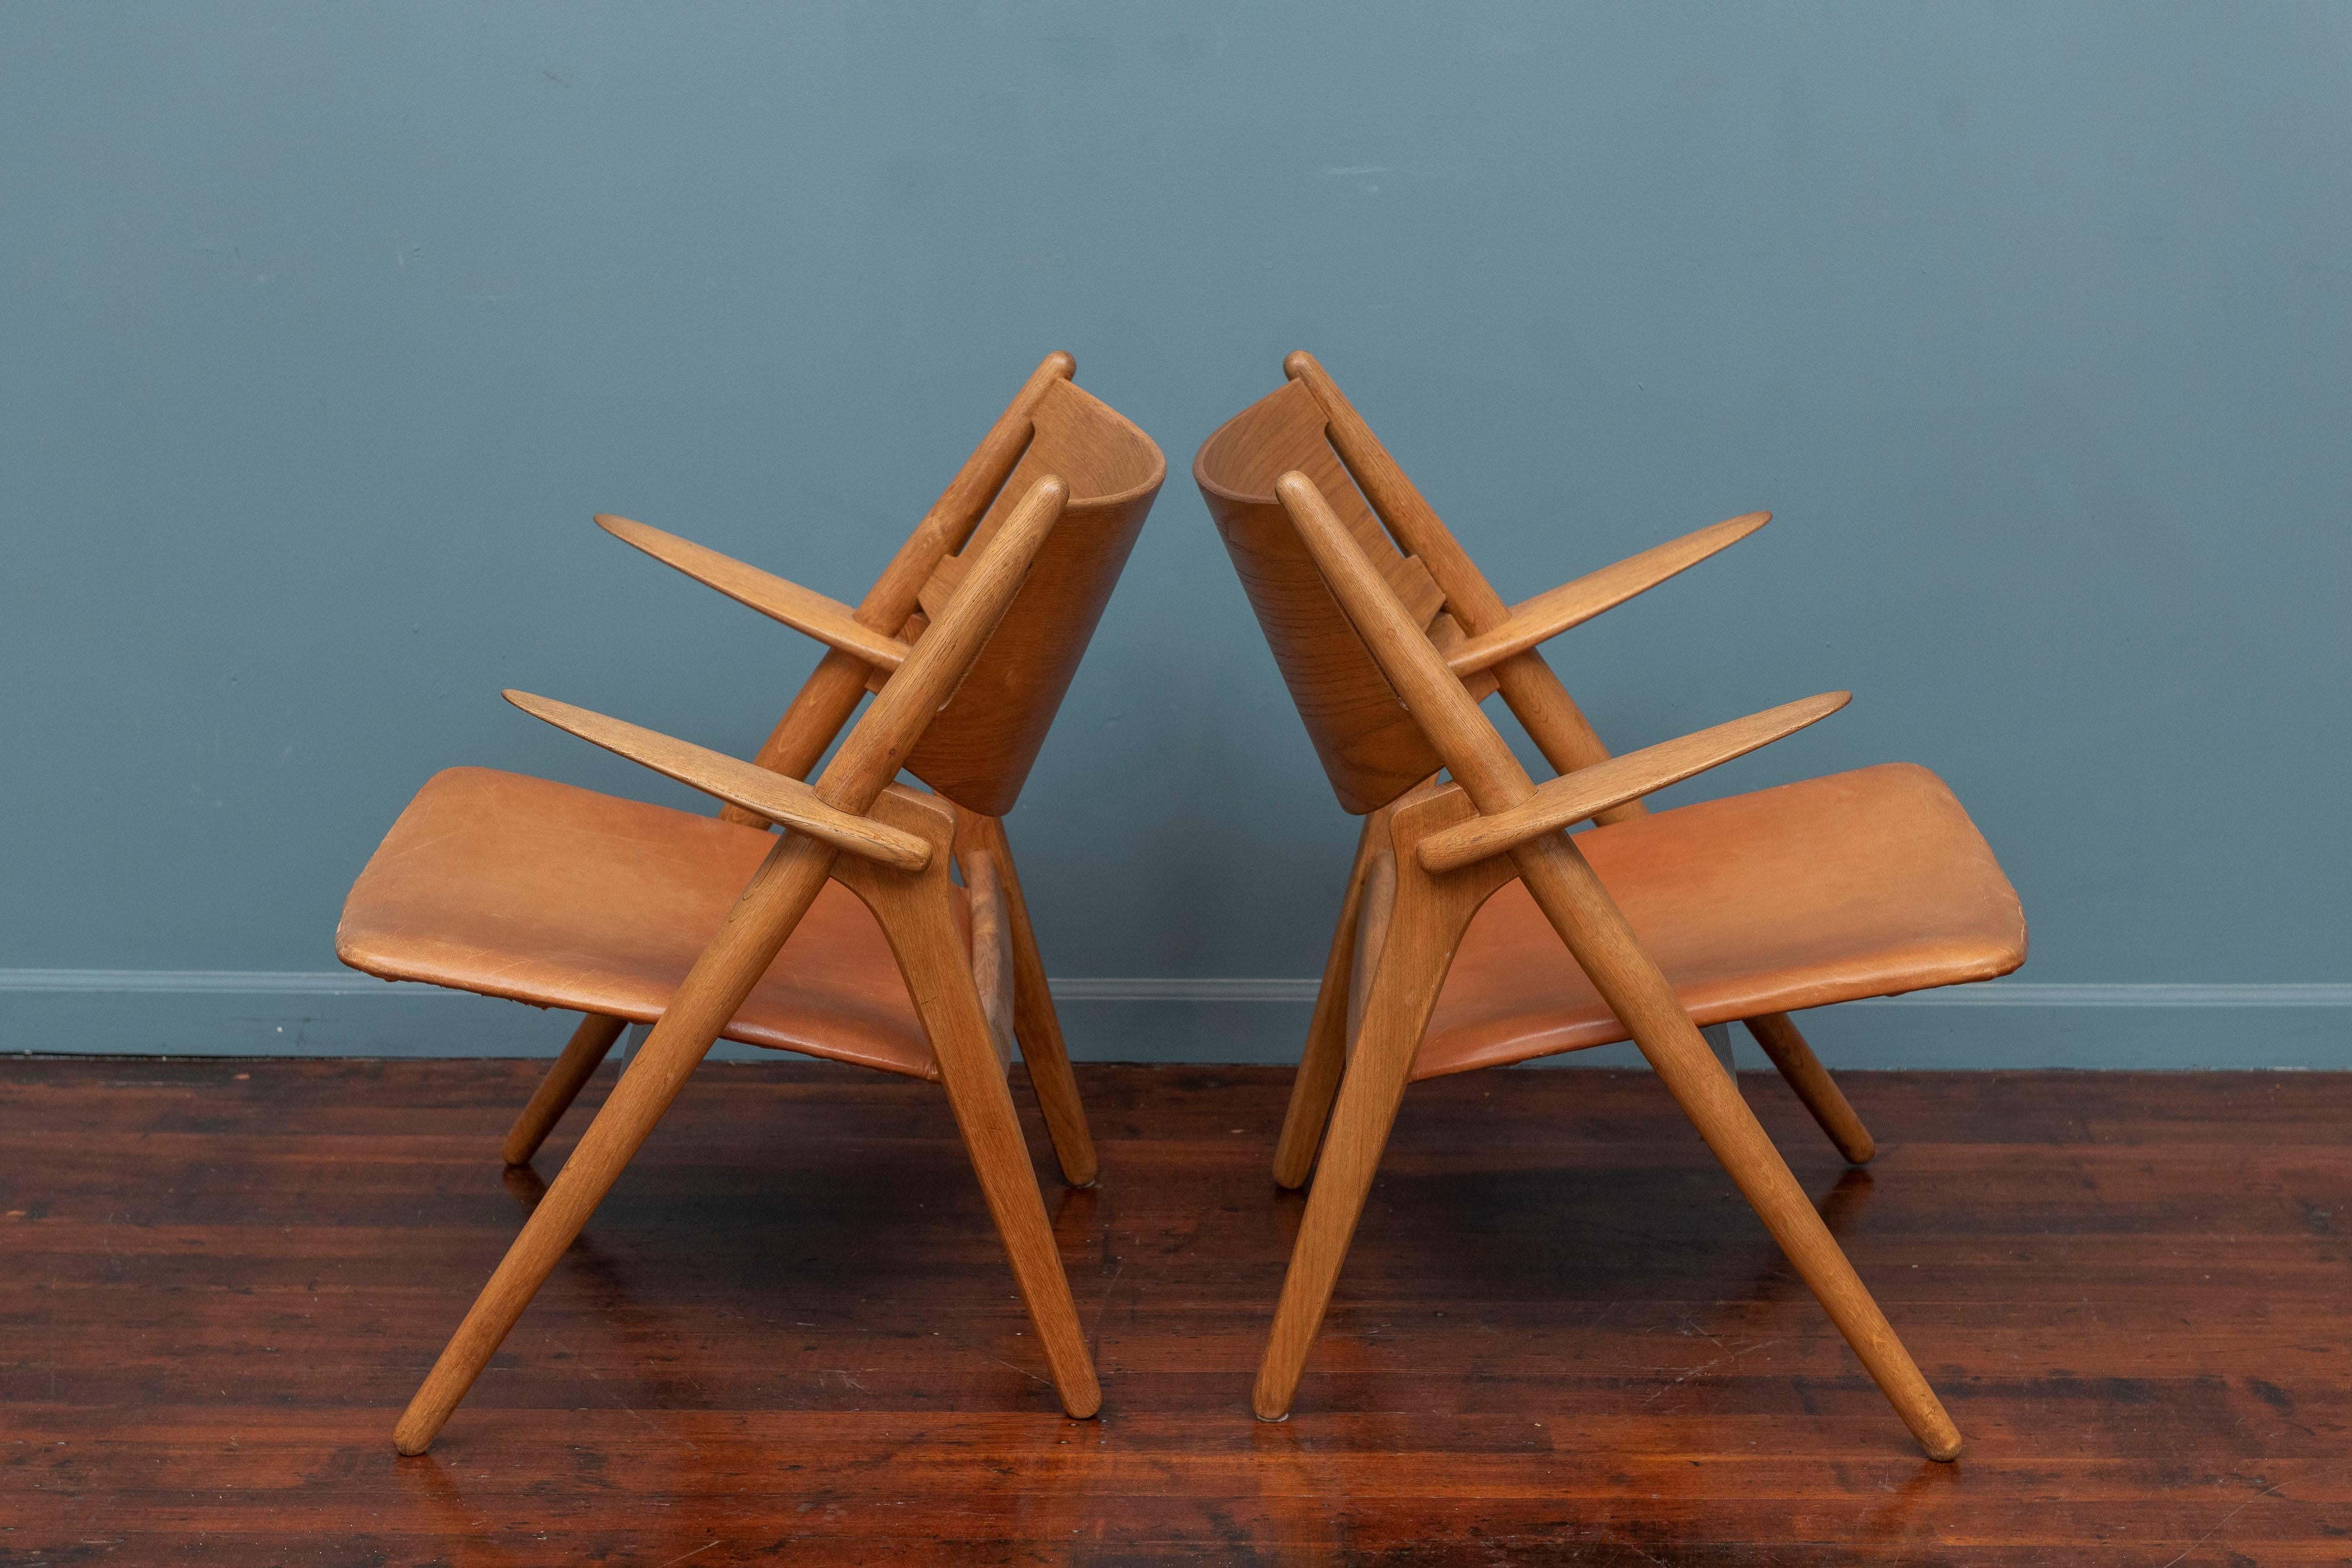 Hans Wegner Sawbuck lounge chairs, Model CH-28 for Carl Hanson & Son. Beautiful original pair of Sawbuck chairs in very good original condition, ready to install and enjoy.